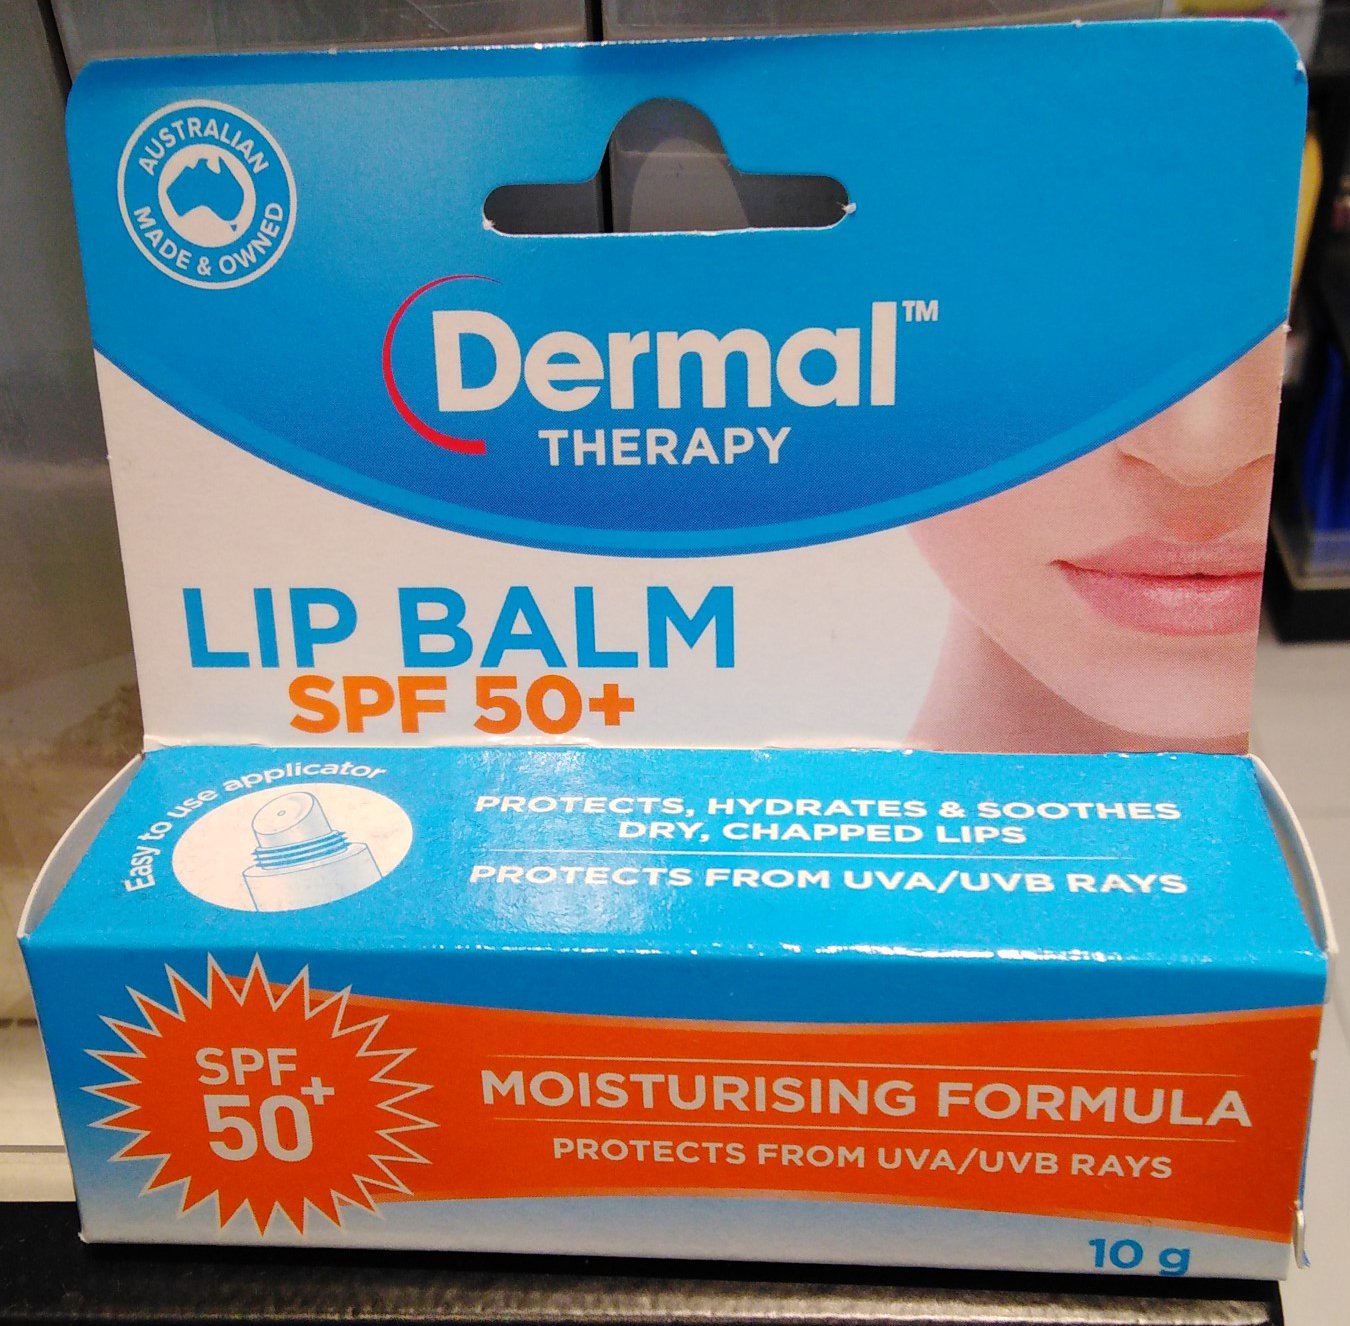 Dermal Therapy Lip Balm SPF 50+ Ultra Protection 10g Beauty care